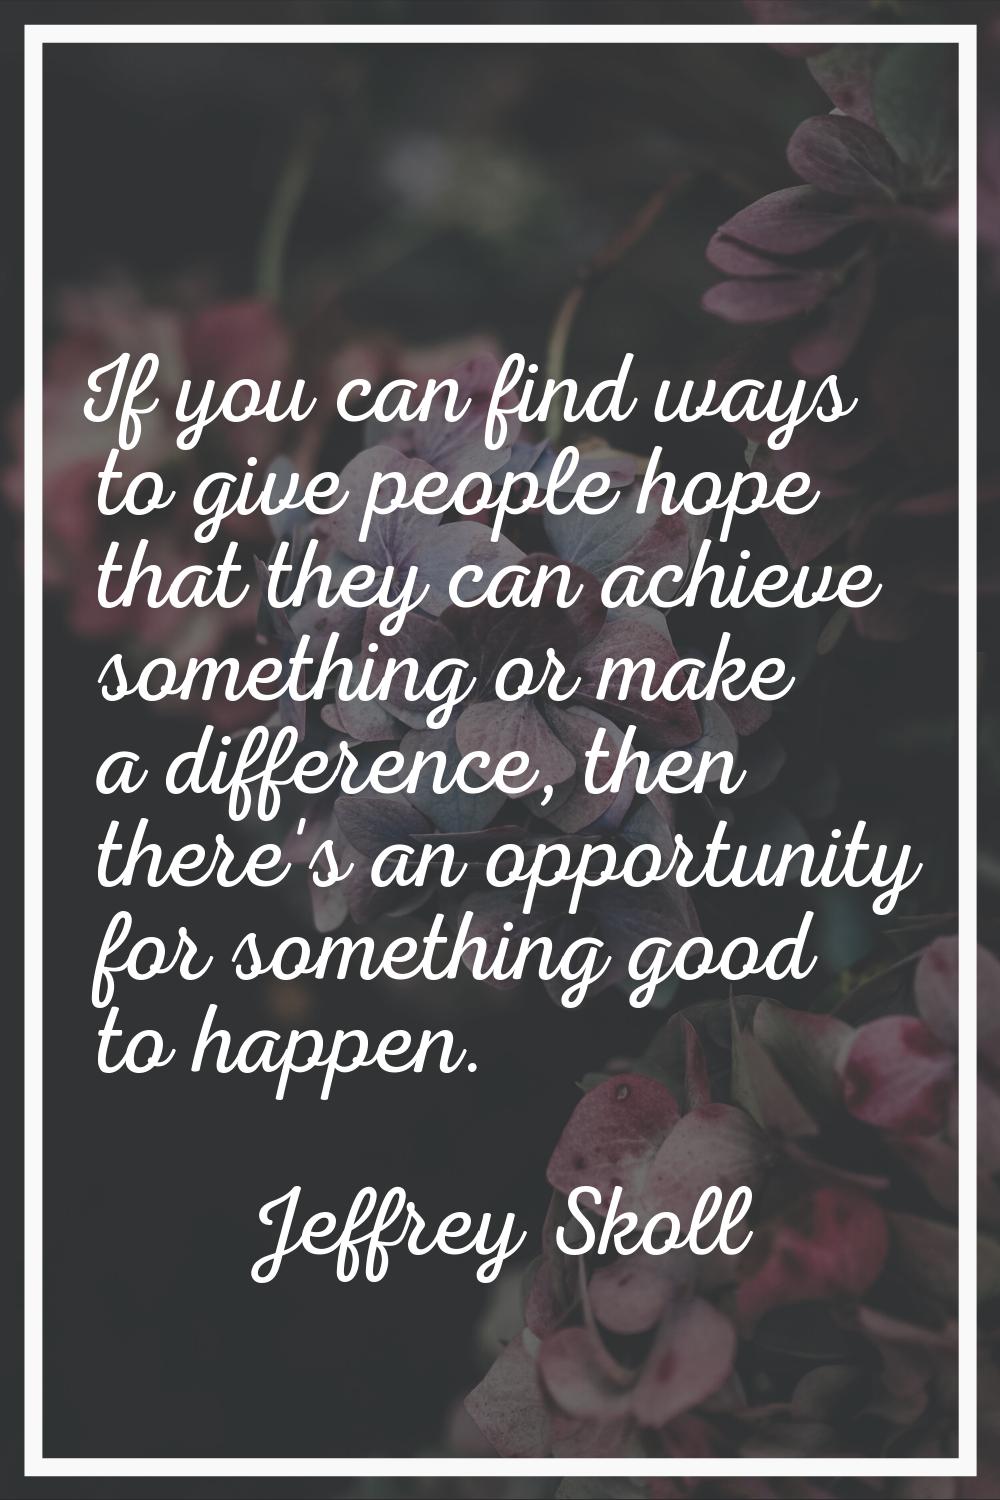 If you can find ways to give people hope that they can achieve something or make a difference, then